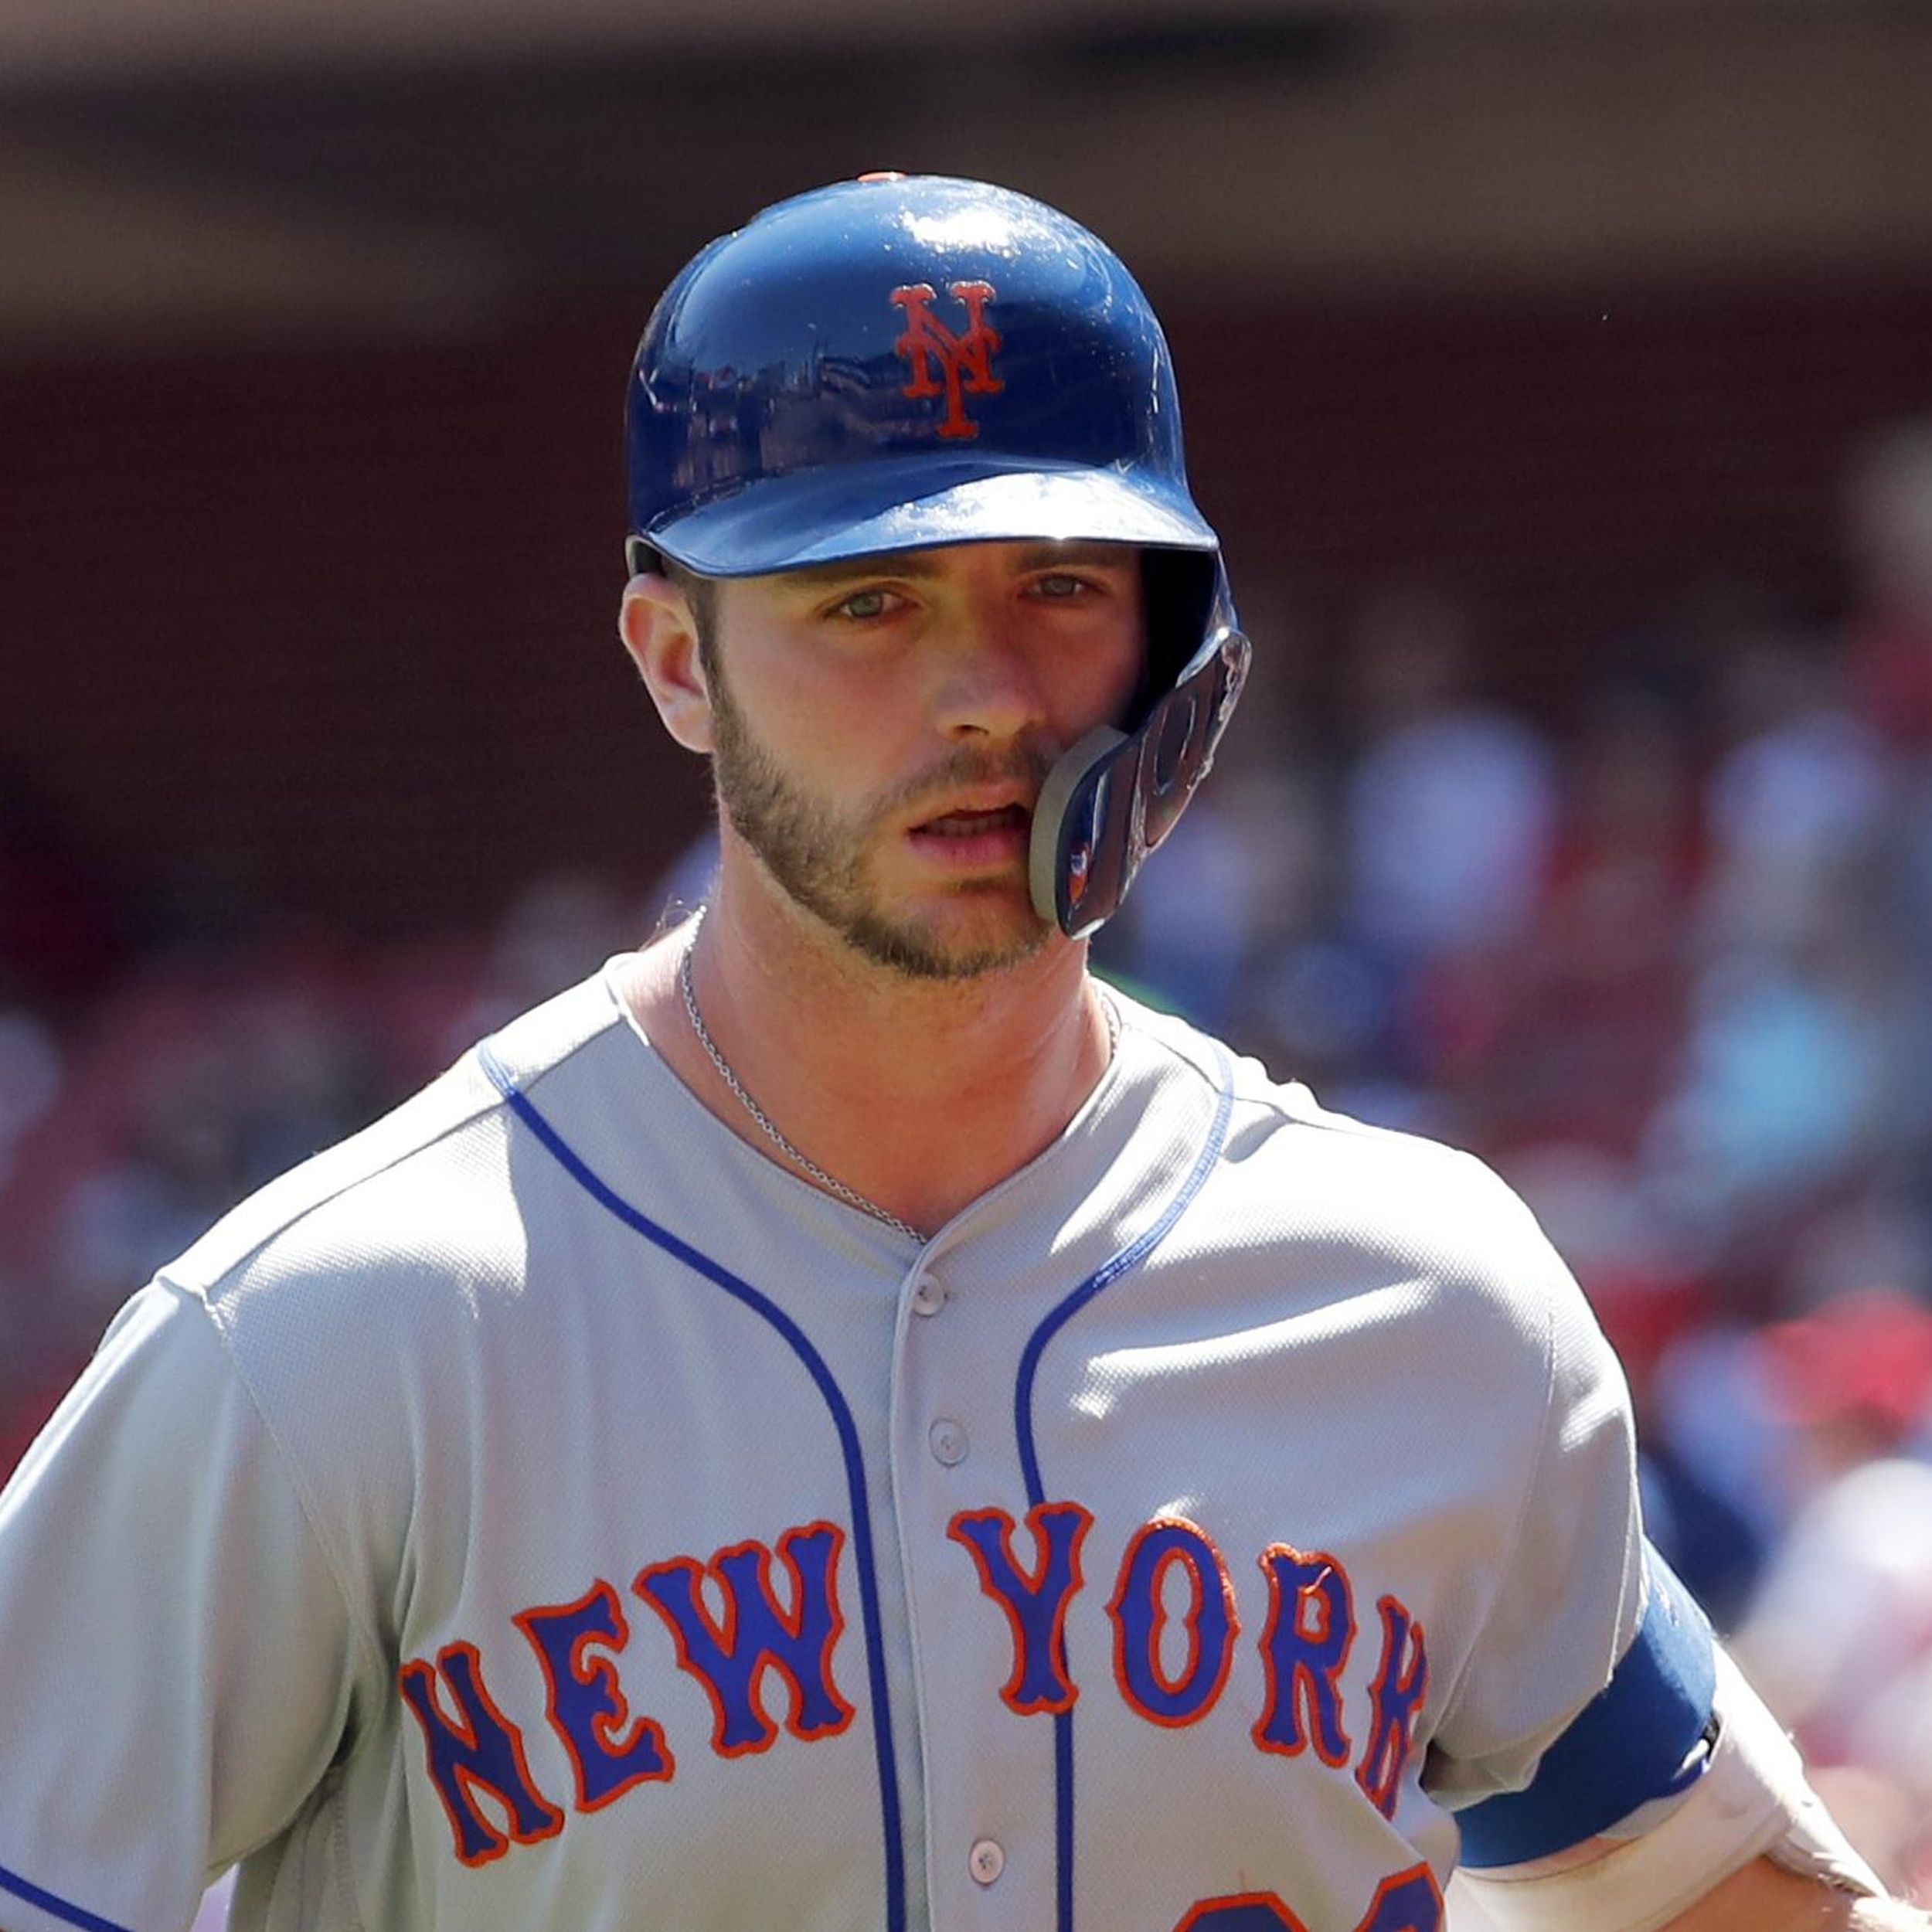 Former Florida Gators standout Pete Alonso will defend Home Run